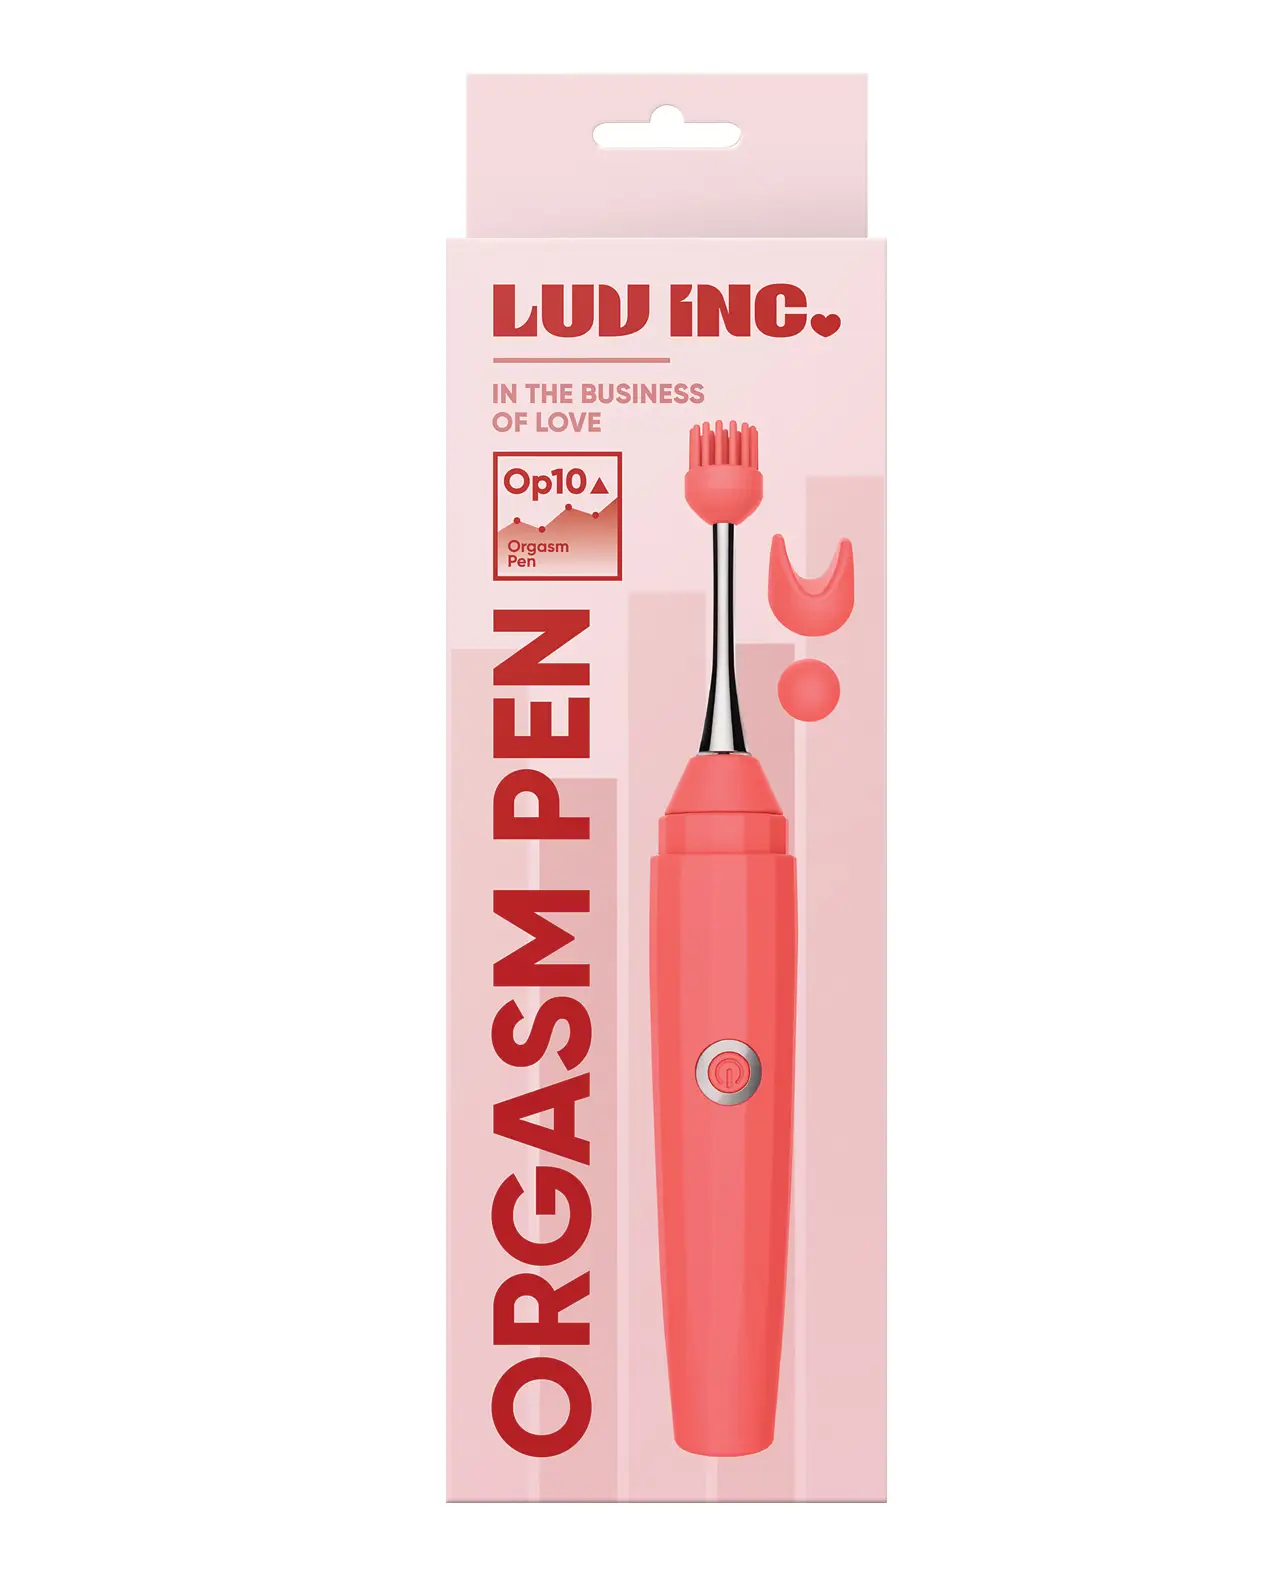 A compact and discreet vibe in coral with three attachments . The Box is pink.